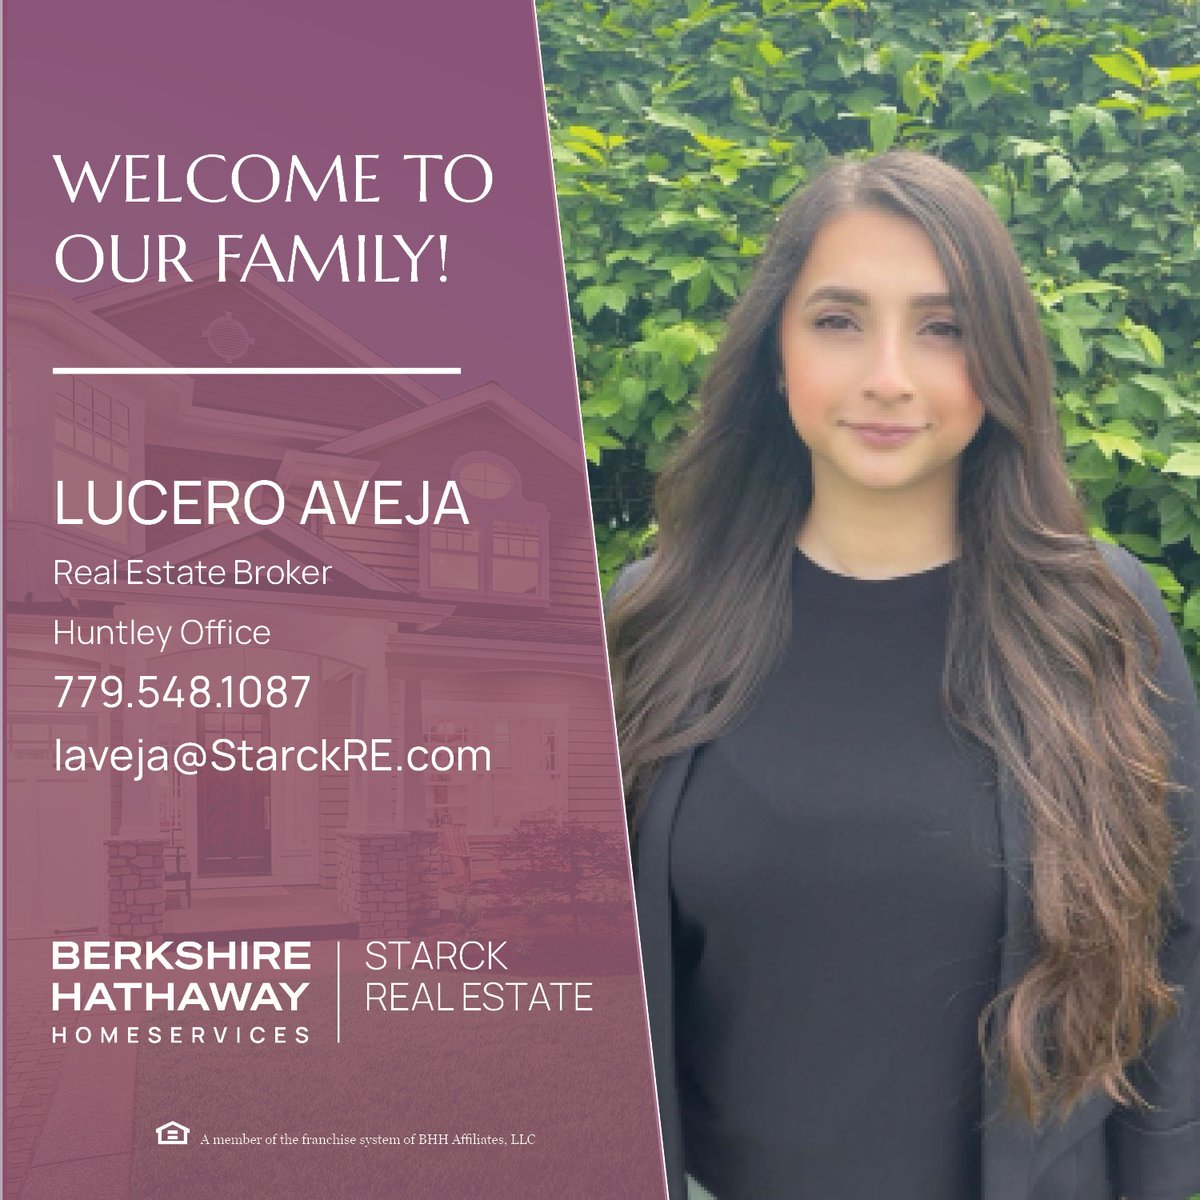 We are thrilled to announce that Lucero Aveja has joined the Starck Family! Please join us in welcoming her! #BHHSrealestate #BHHSstarckrealestate #StarckRealEstate #ForeverBrand #ForeverAgent #ForEveryone #GTK #Integrity #Charitable #Knowledgeable